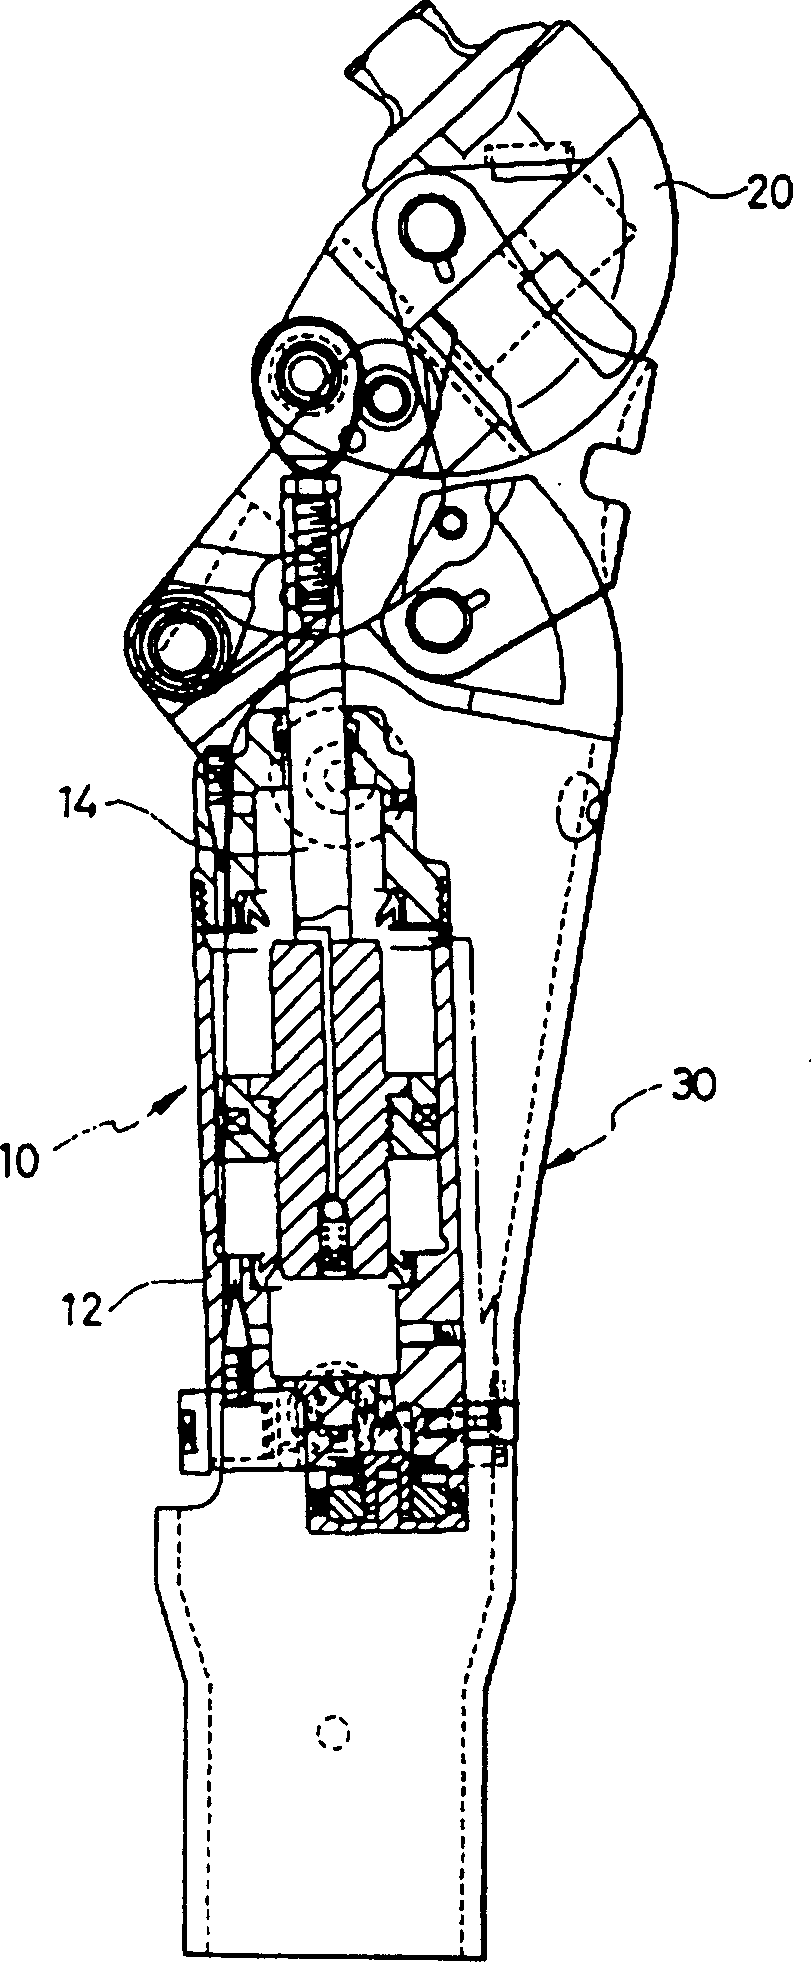 Air cylinder device for artificial limb